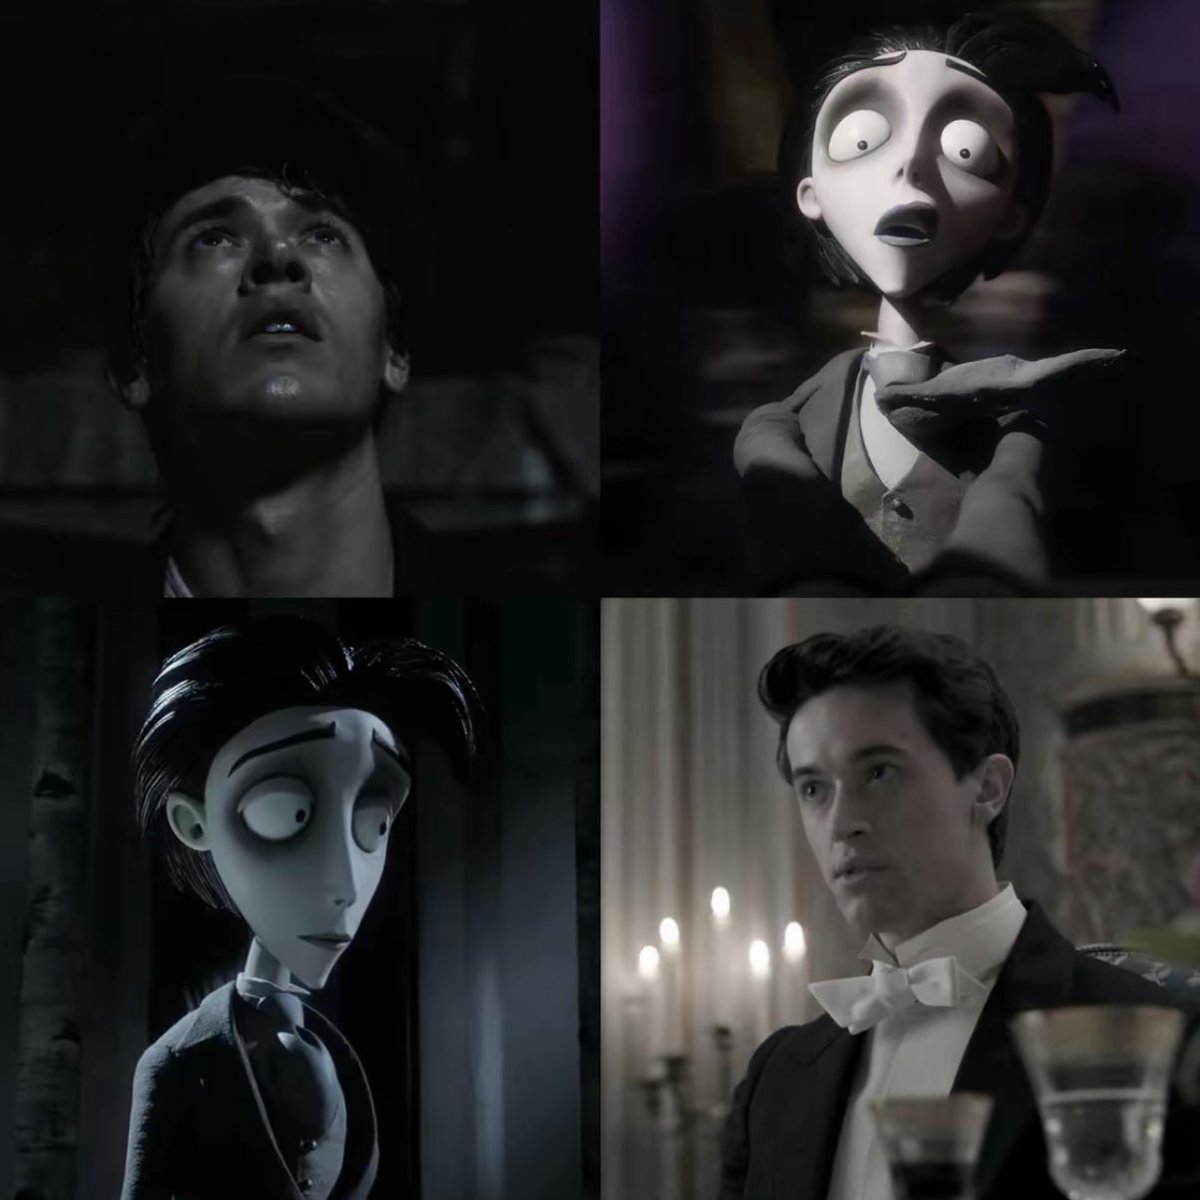 TOM AS VICTOR FROM CORPSE BRIDE ITS JOEVER